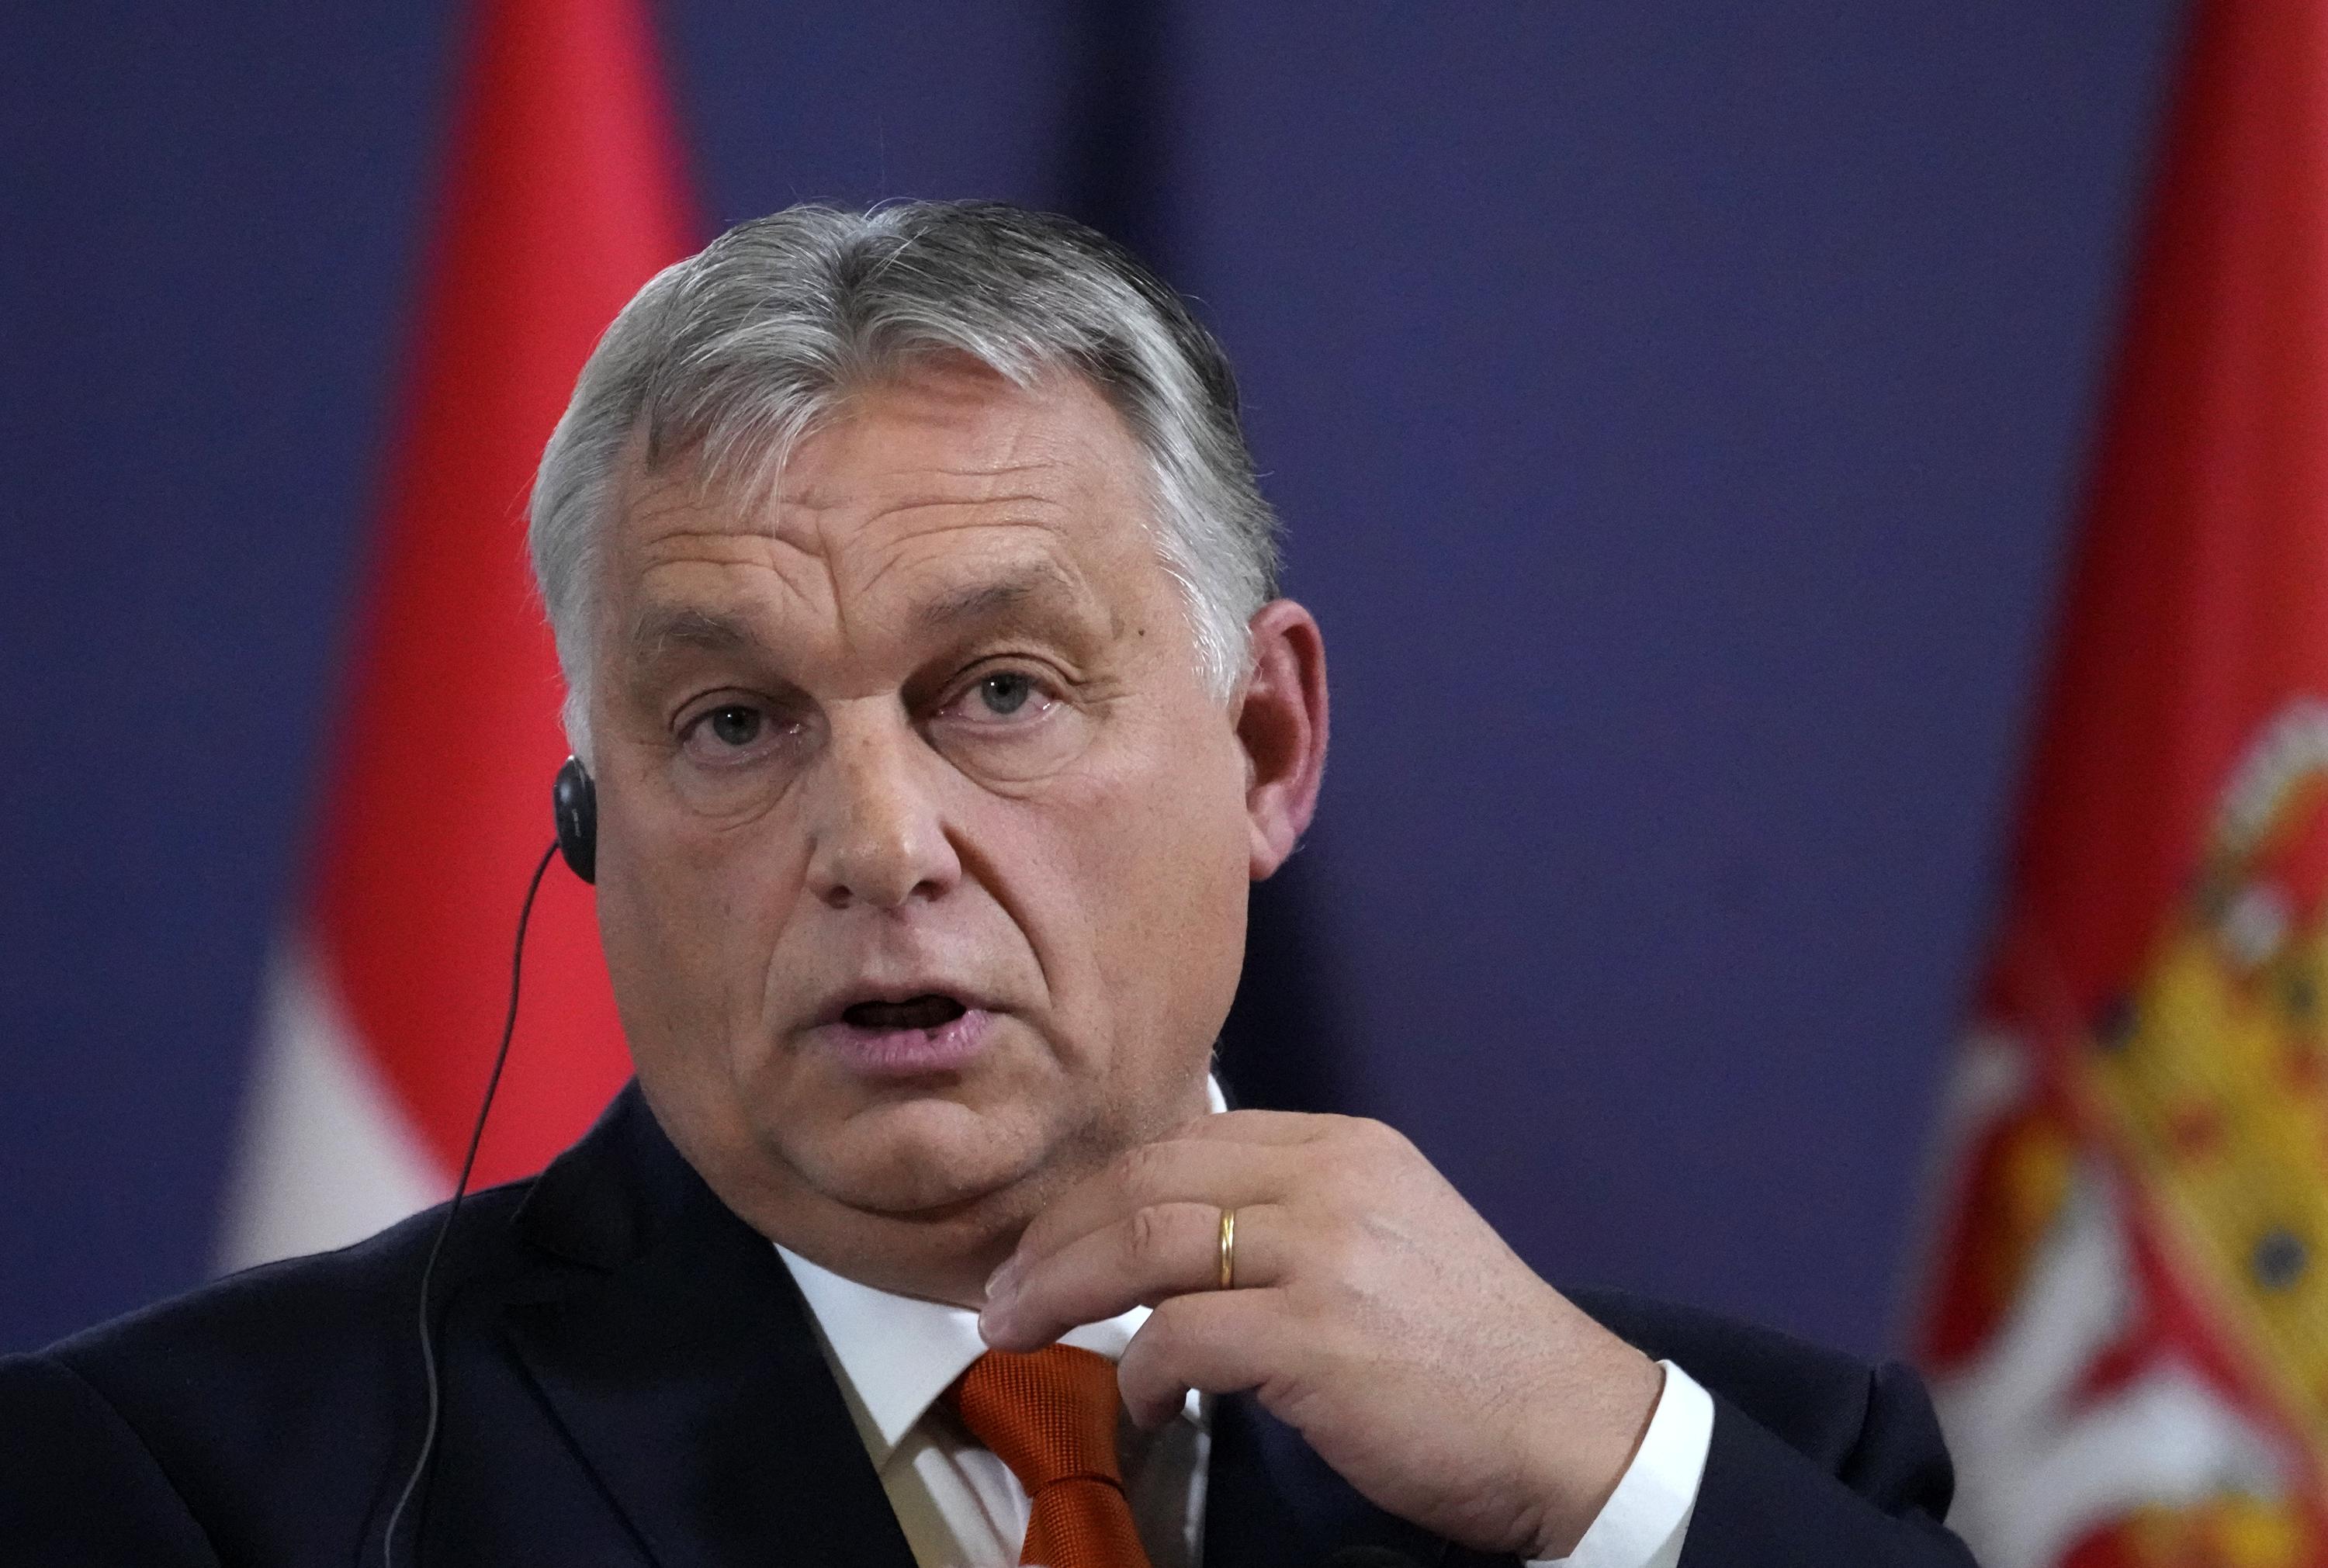 Hungary will not support EU aid plan to Ukraine, Orban says. Hungarian PM must support his people first.